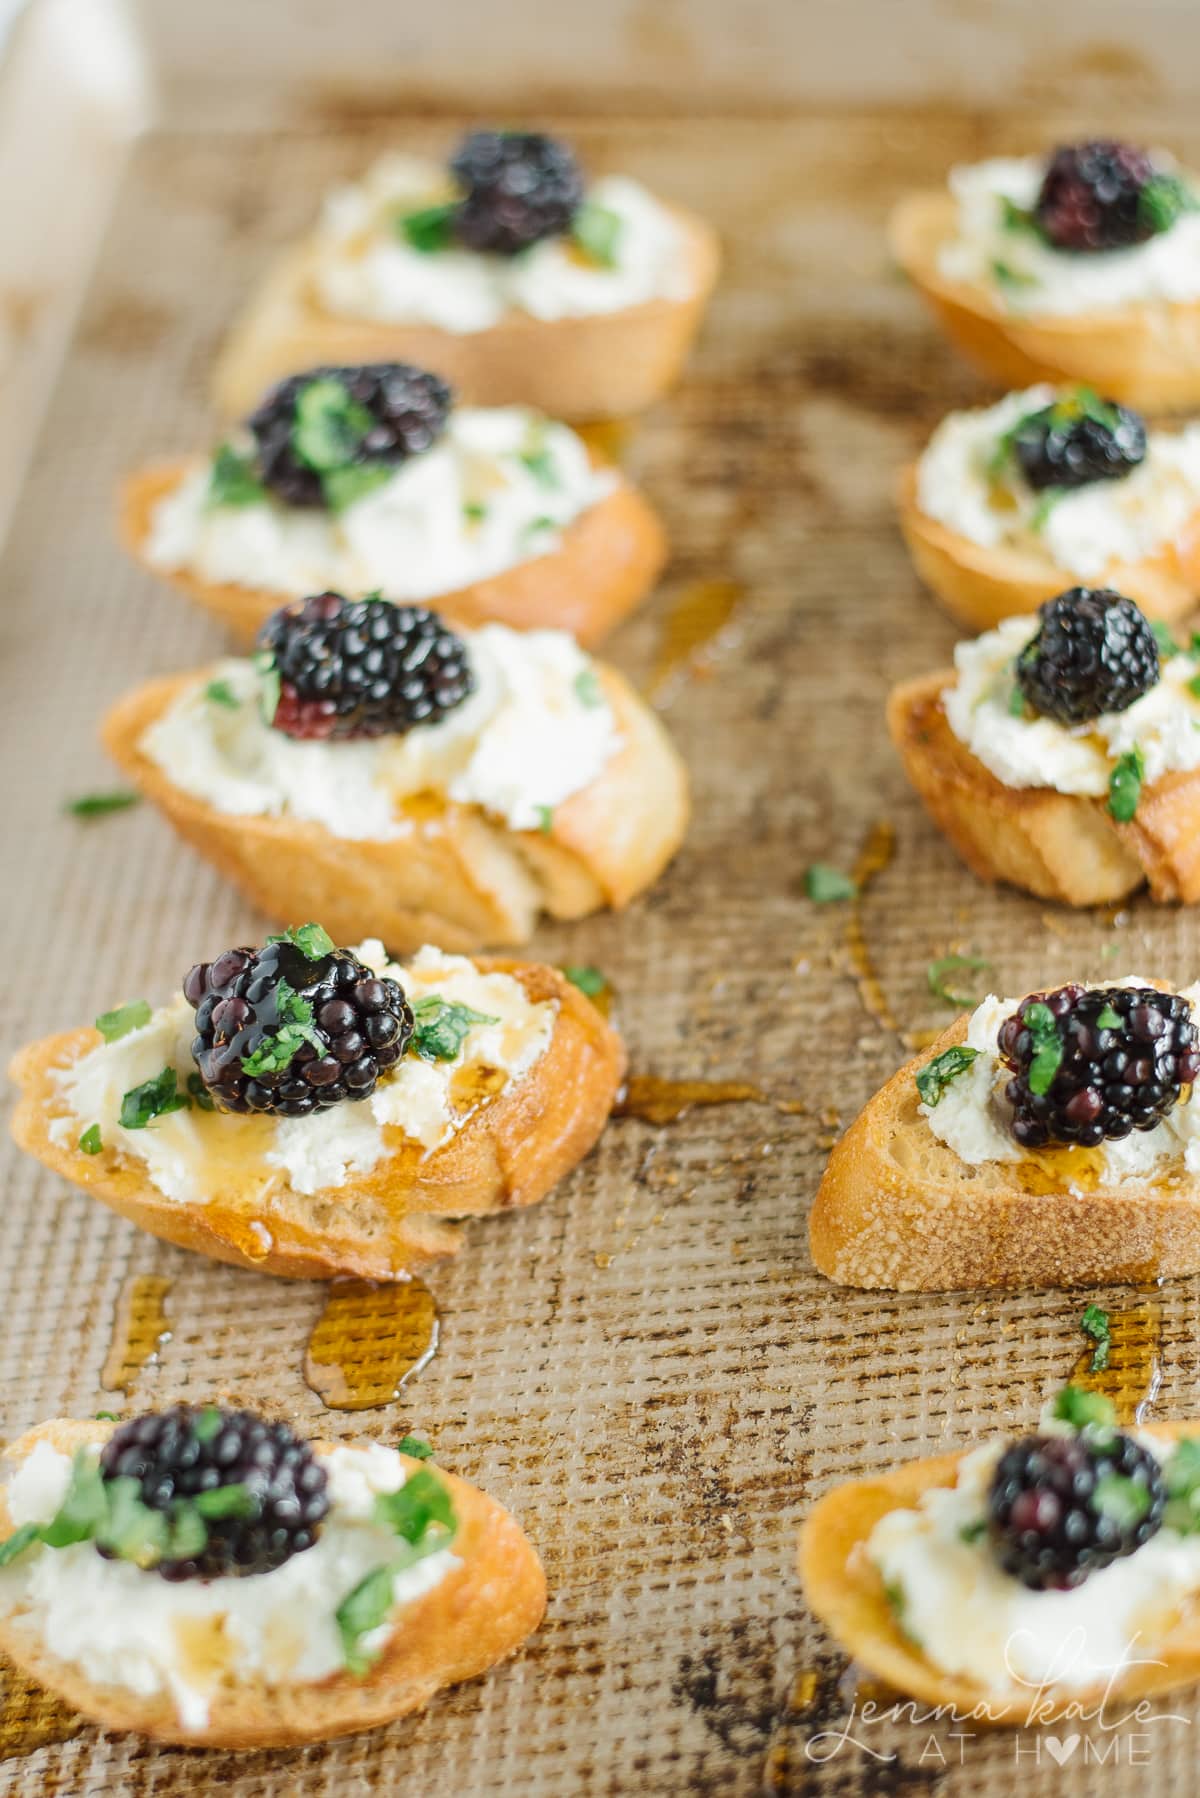 Honey drizzled over crostini appetizers